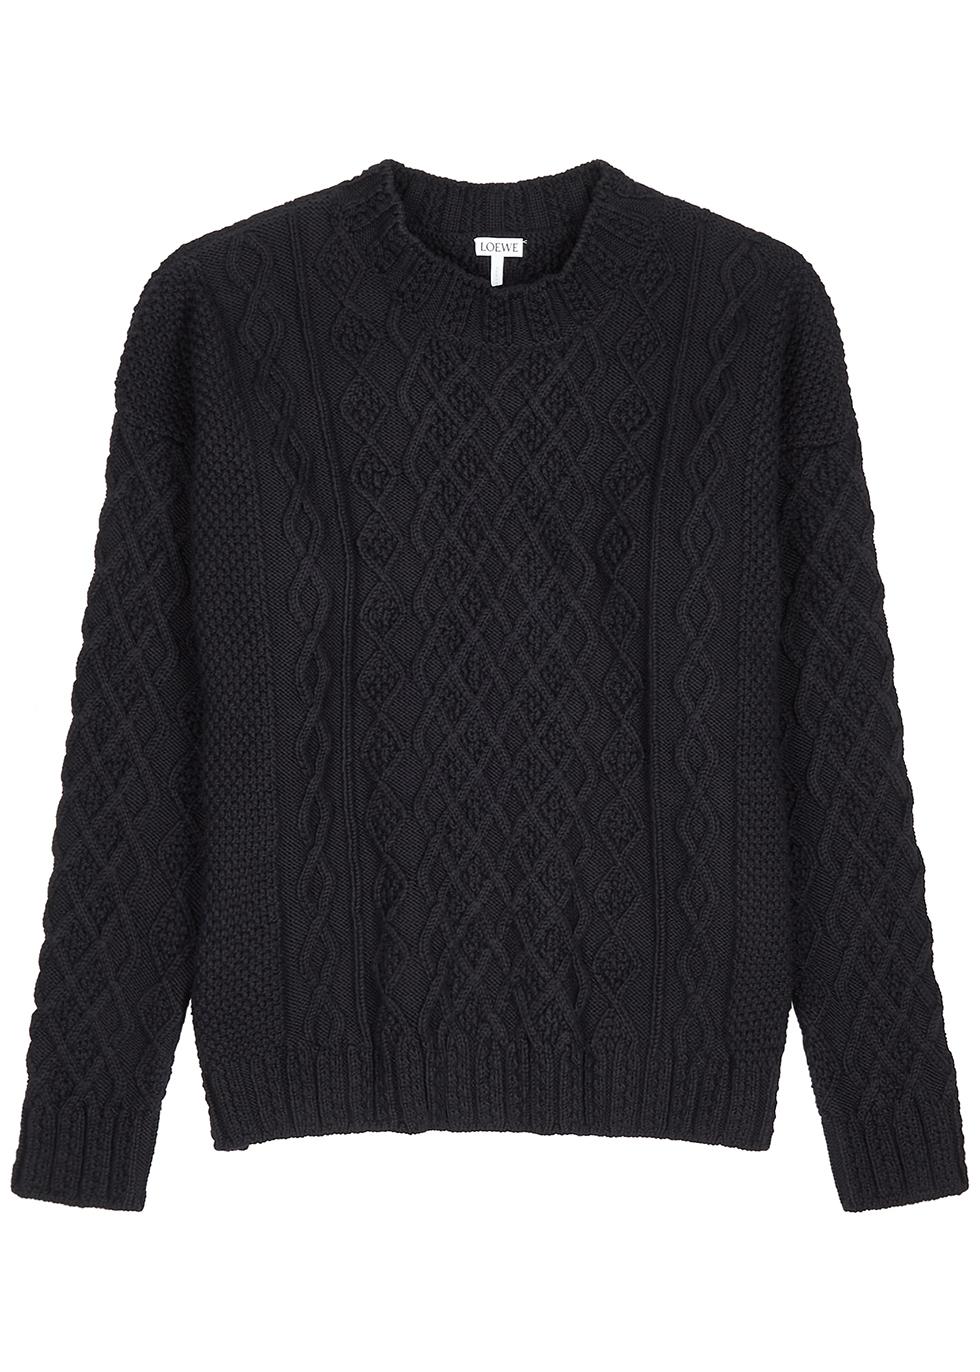 Loewe Navy Cable-knit Cotton Jumper in Blue for Men - Lyst